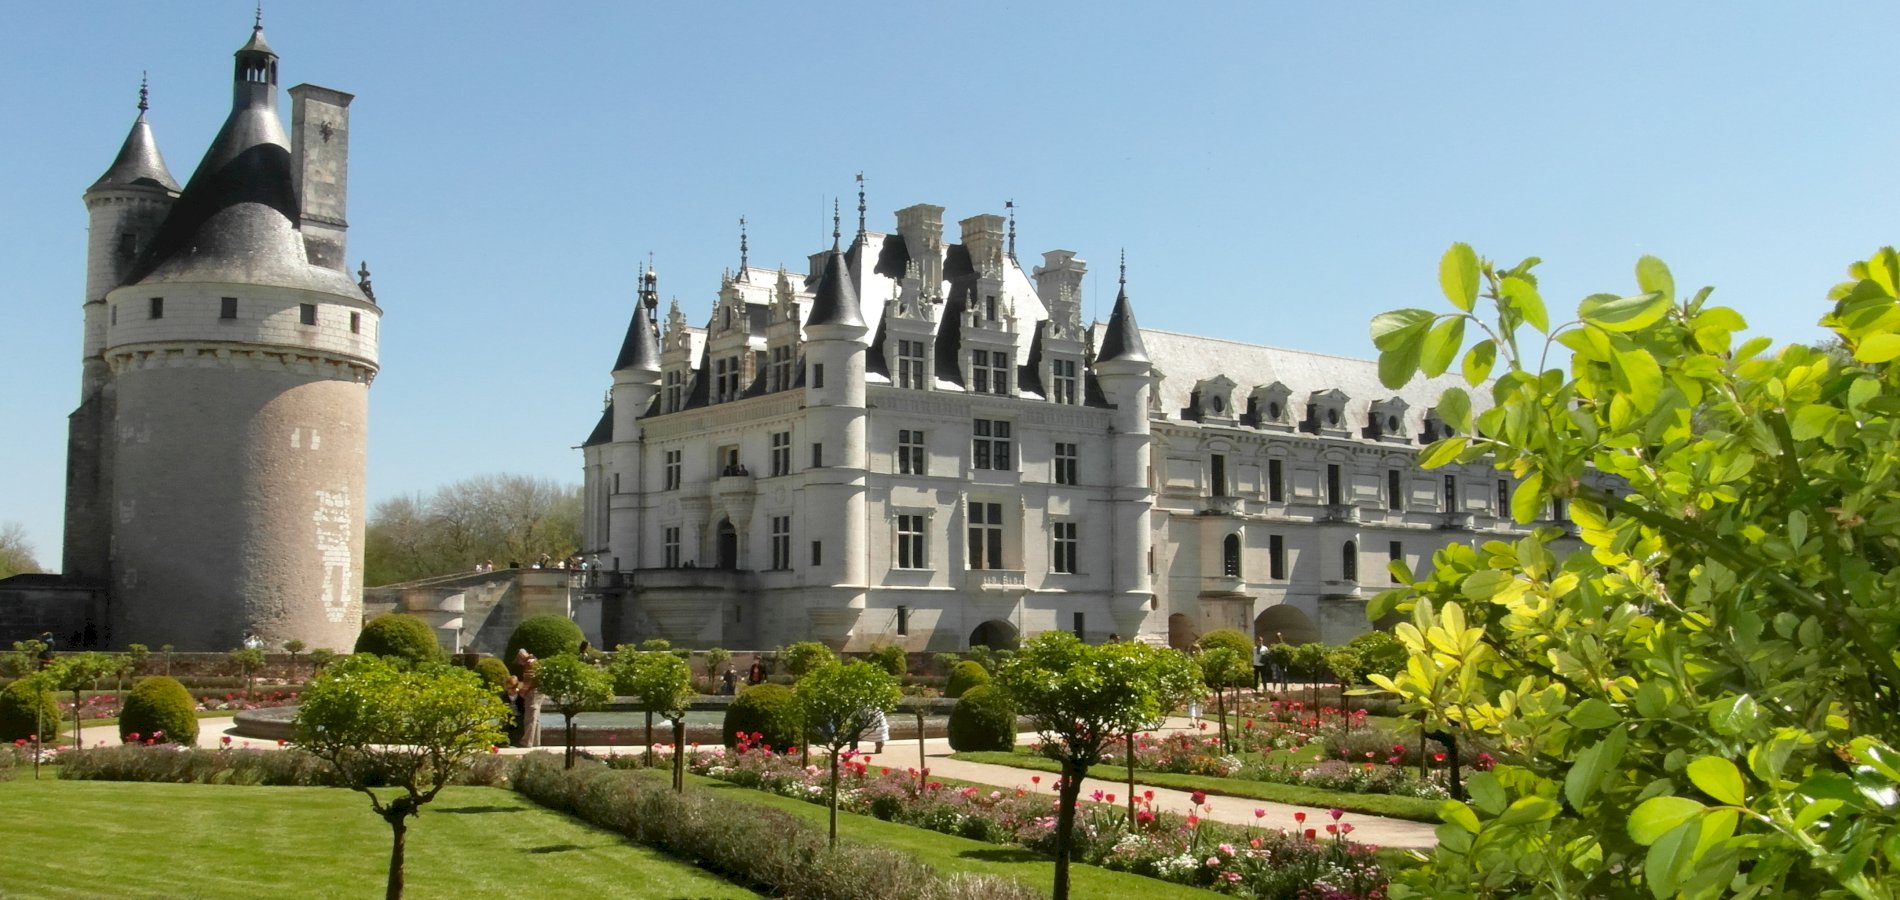 Ophorus Tours - A Half Day Trip from Tours to Chenonceau Castle